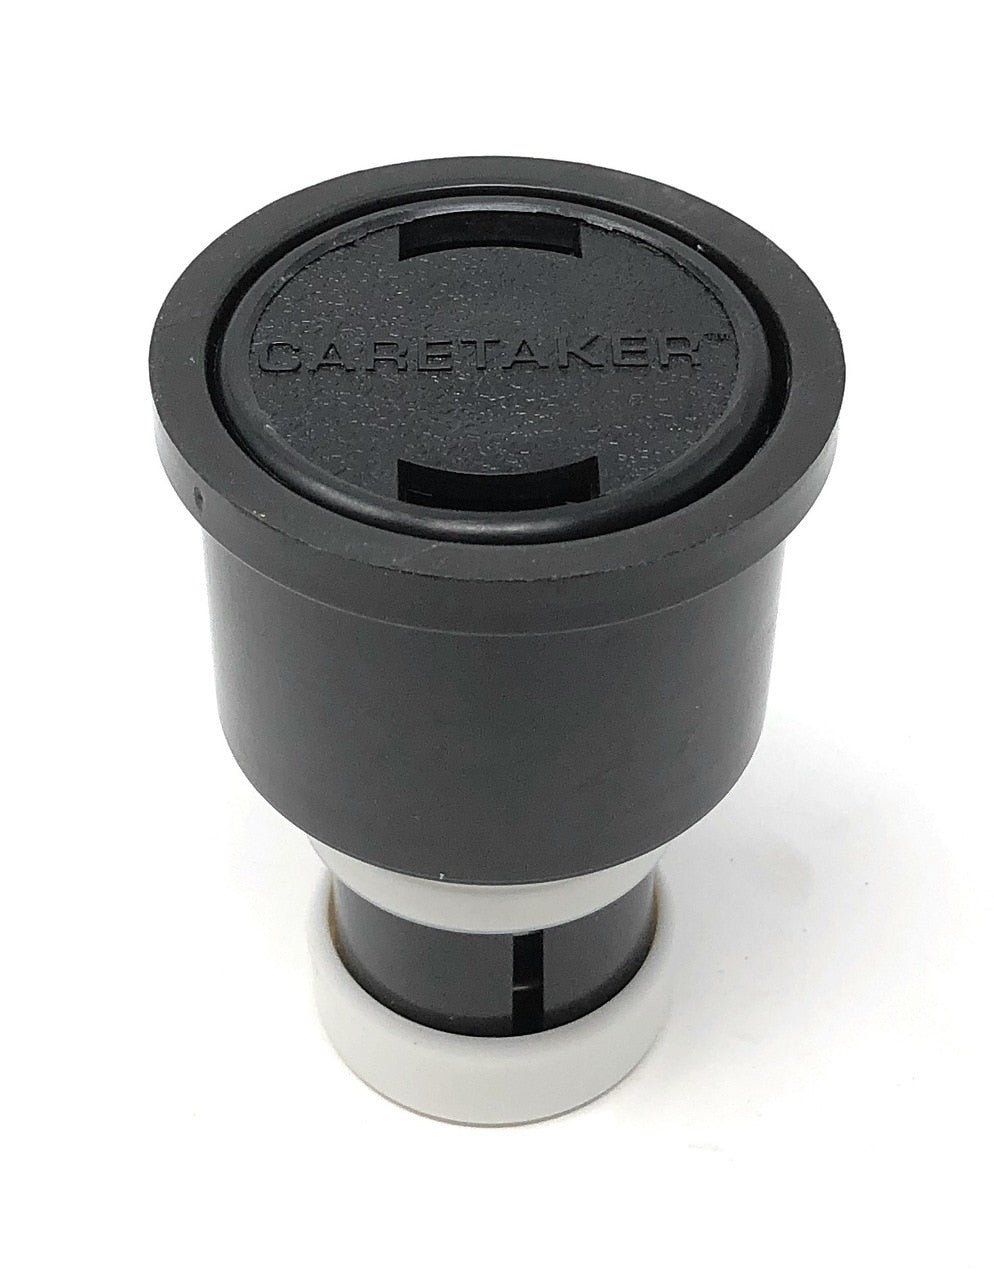 Caretaker 99 Complete 2" High Flow Cleaning Head (Jet Black) - Fully Assembled